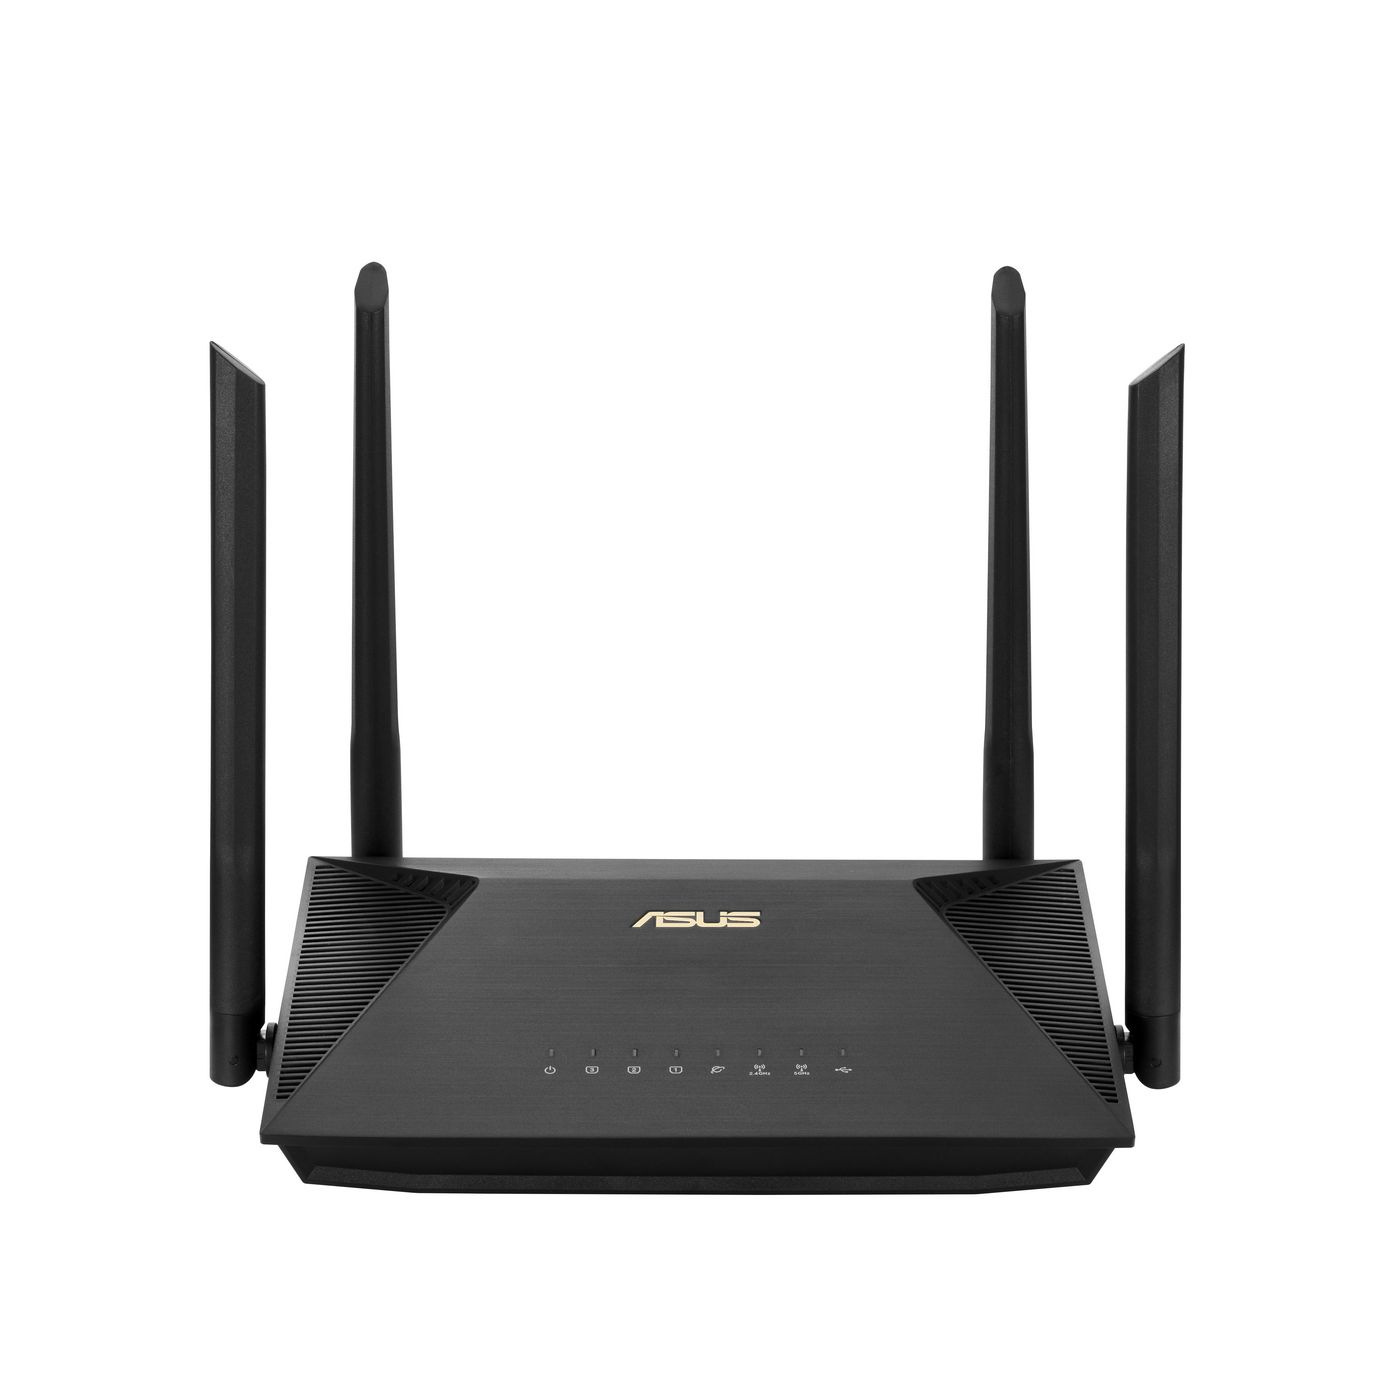 Asus 90IG06P0-MO3530 W128280732 Rt-Ax1800U Wireless Router 